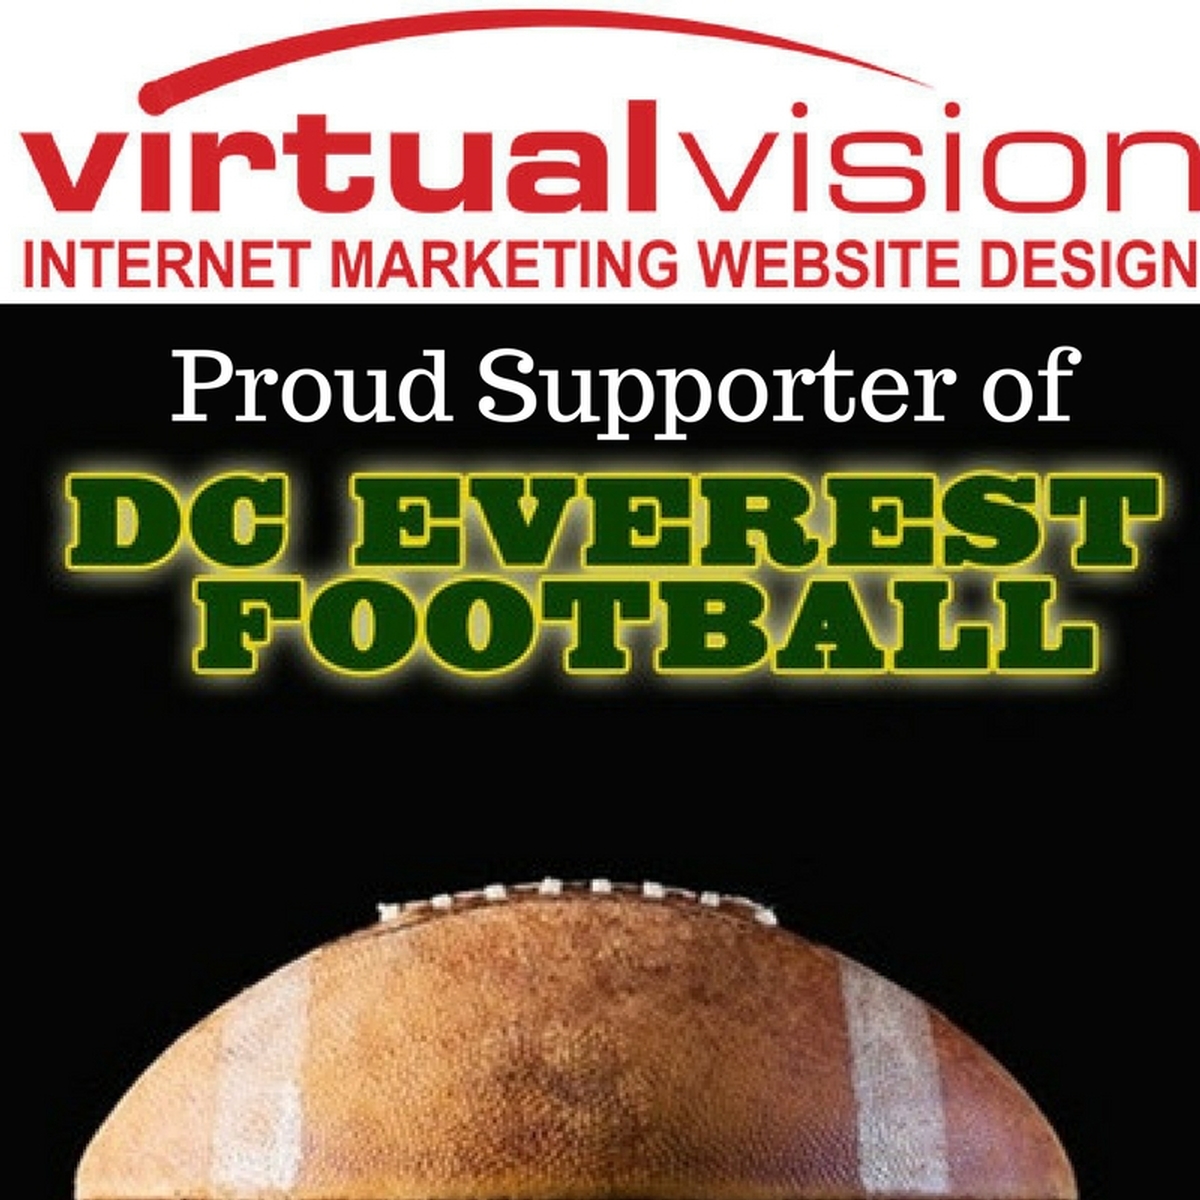 Virtual Vision is a proud supporter of DC Everest Football in 2017